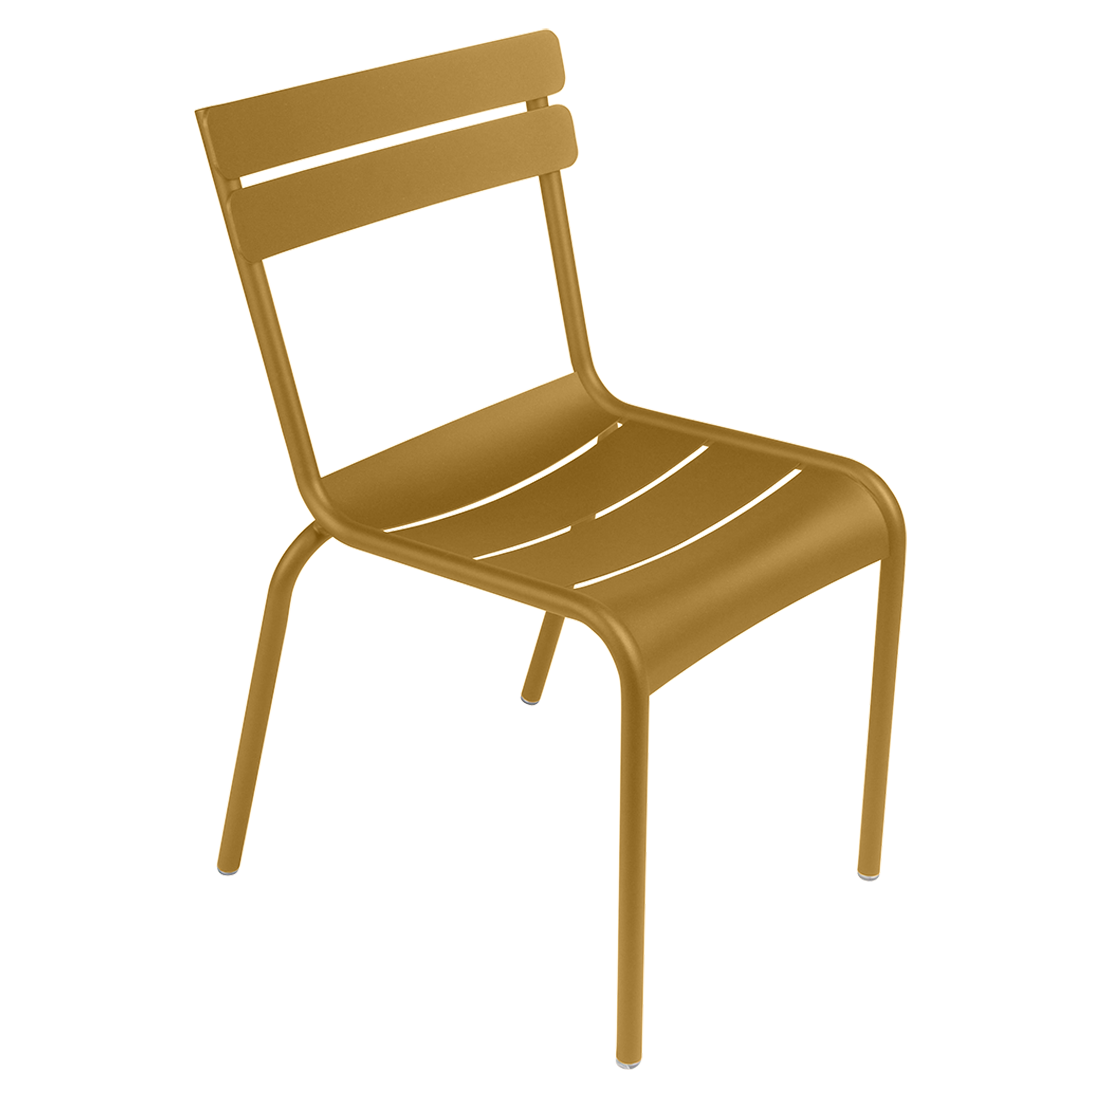 LUXEMBOURG STEEL CHAIR (Exc. Cont.)